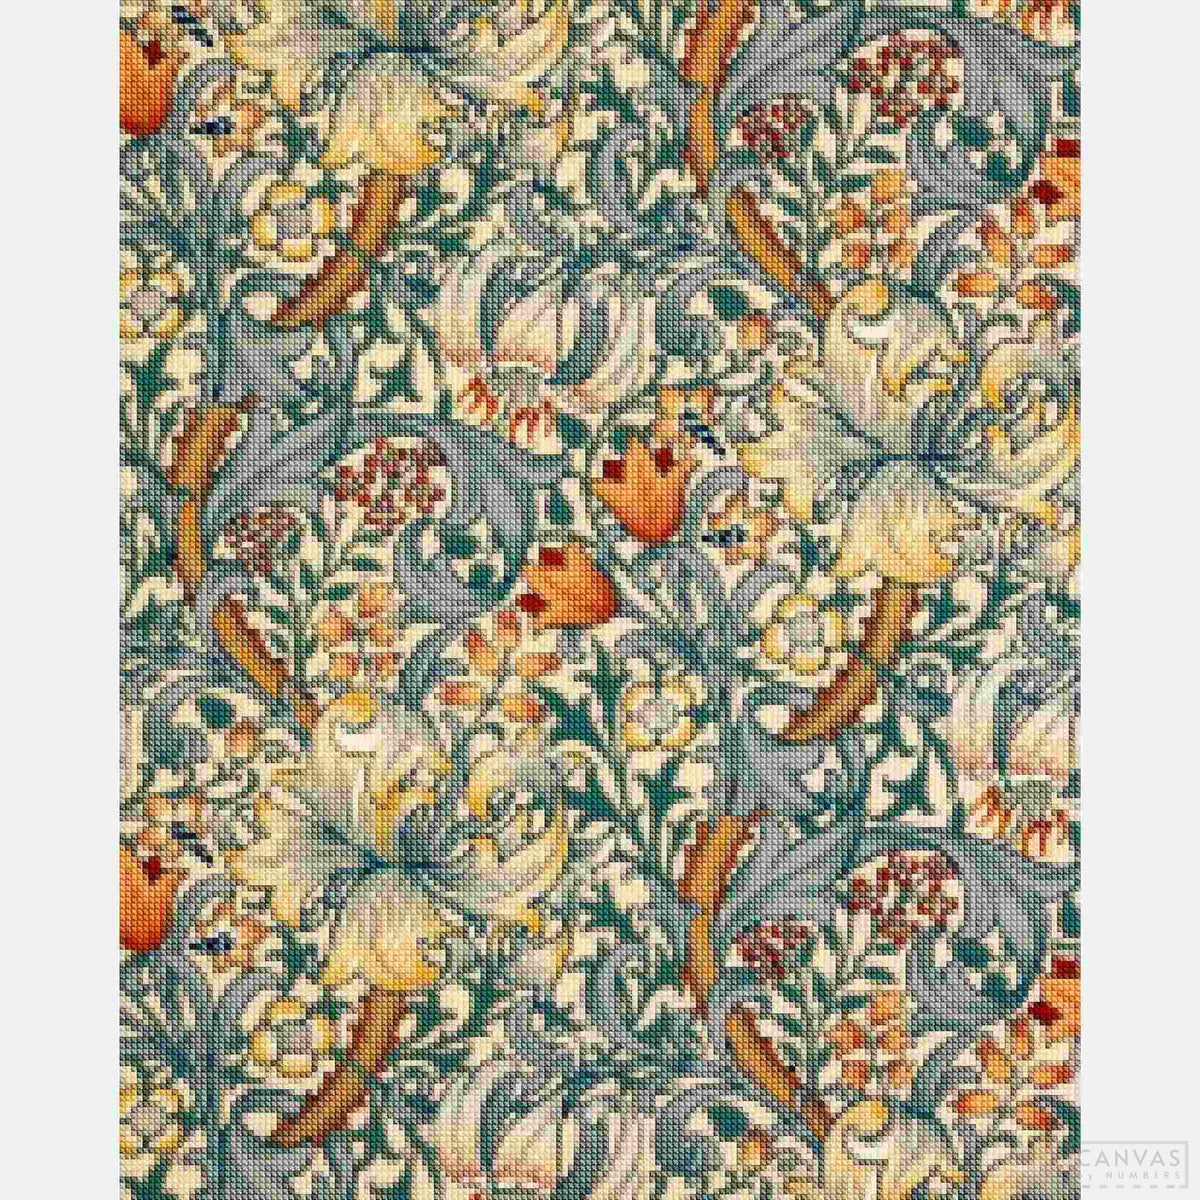 Golden Lily - Diamond Painting-Craft your own masterpiece with the Morris & Co-inspired Diamond Art Kit. Ideal for all skill levels, the entwined lily pattern offers a meditative crafting session.-Canvas by Numbers